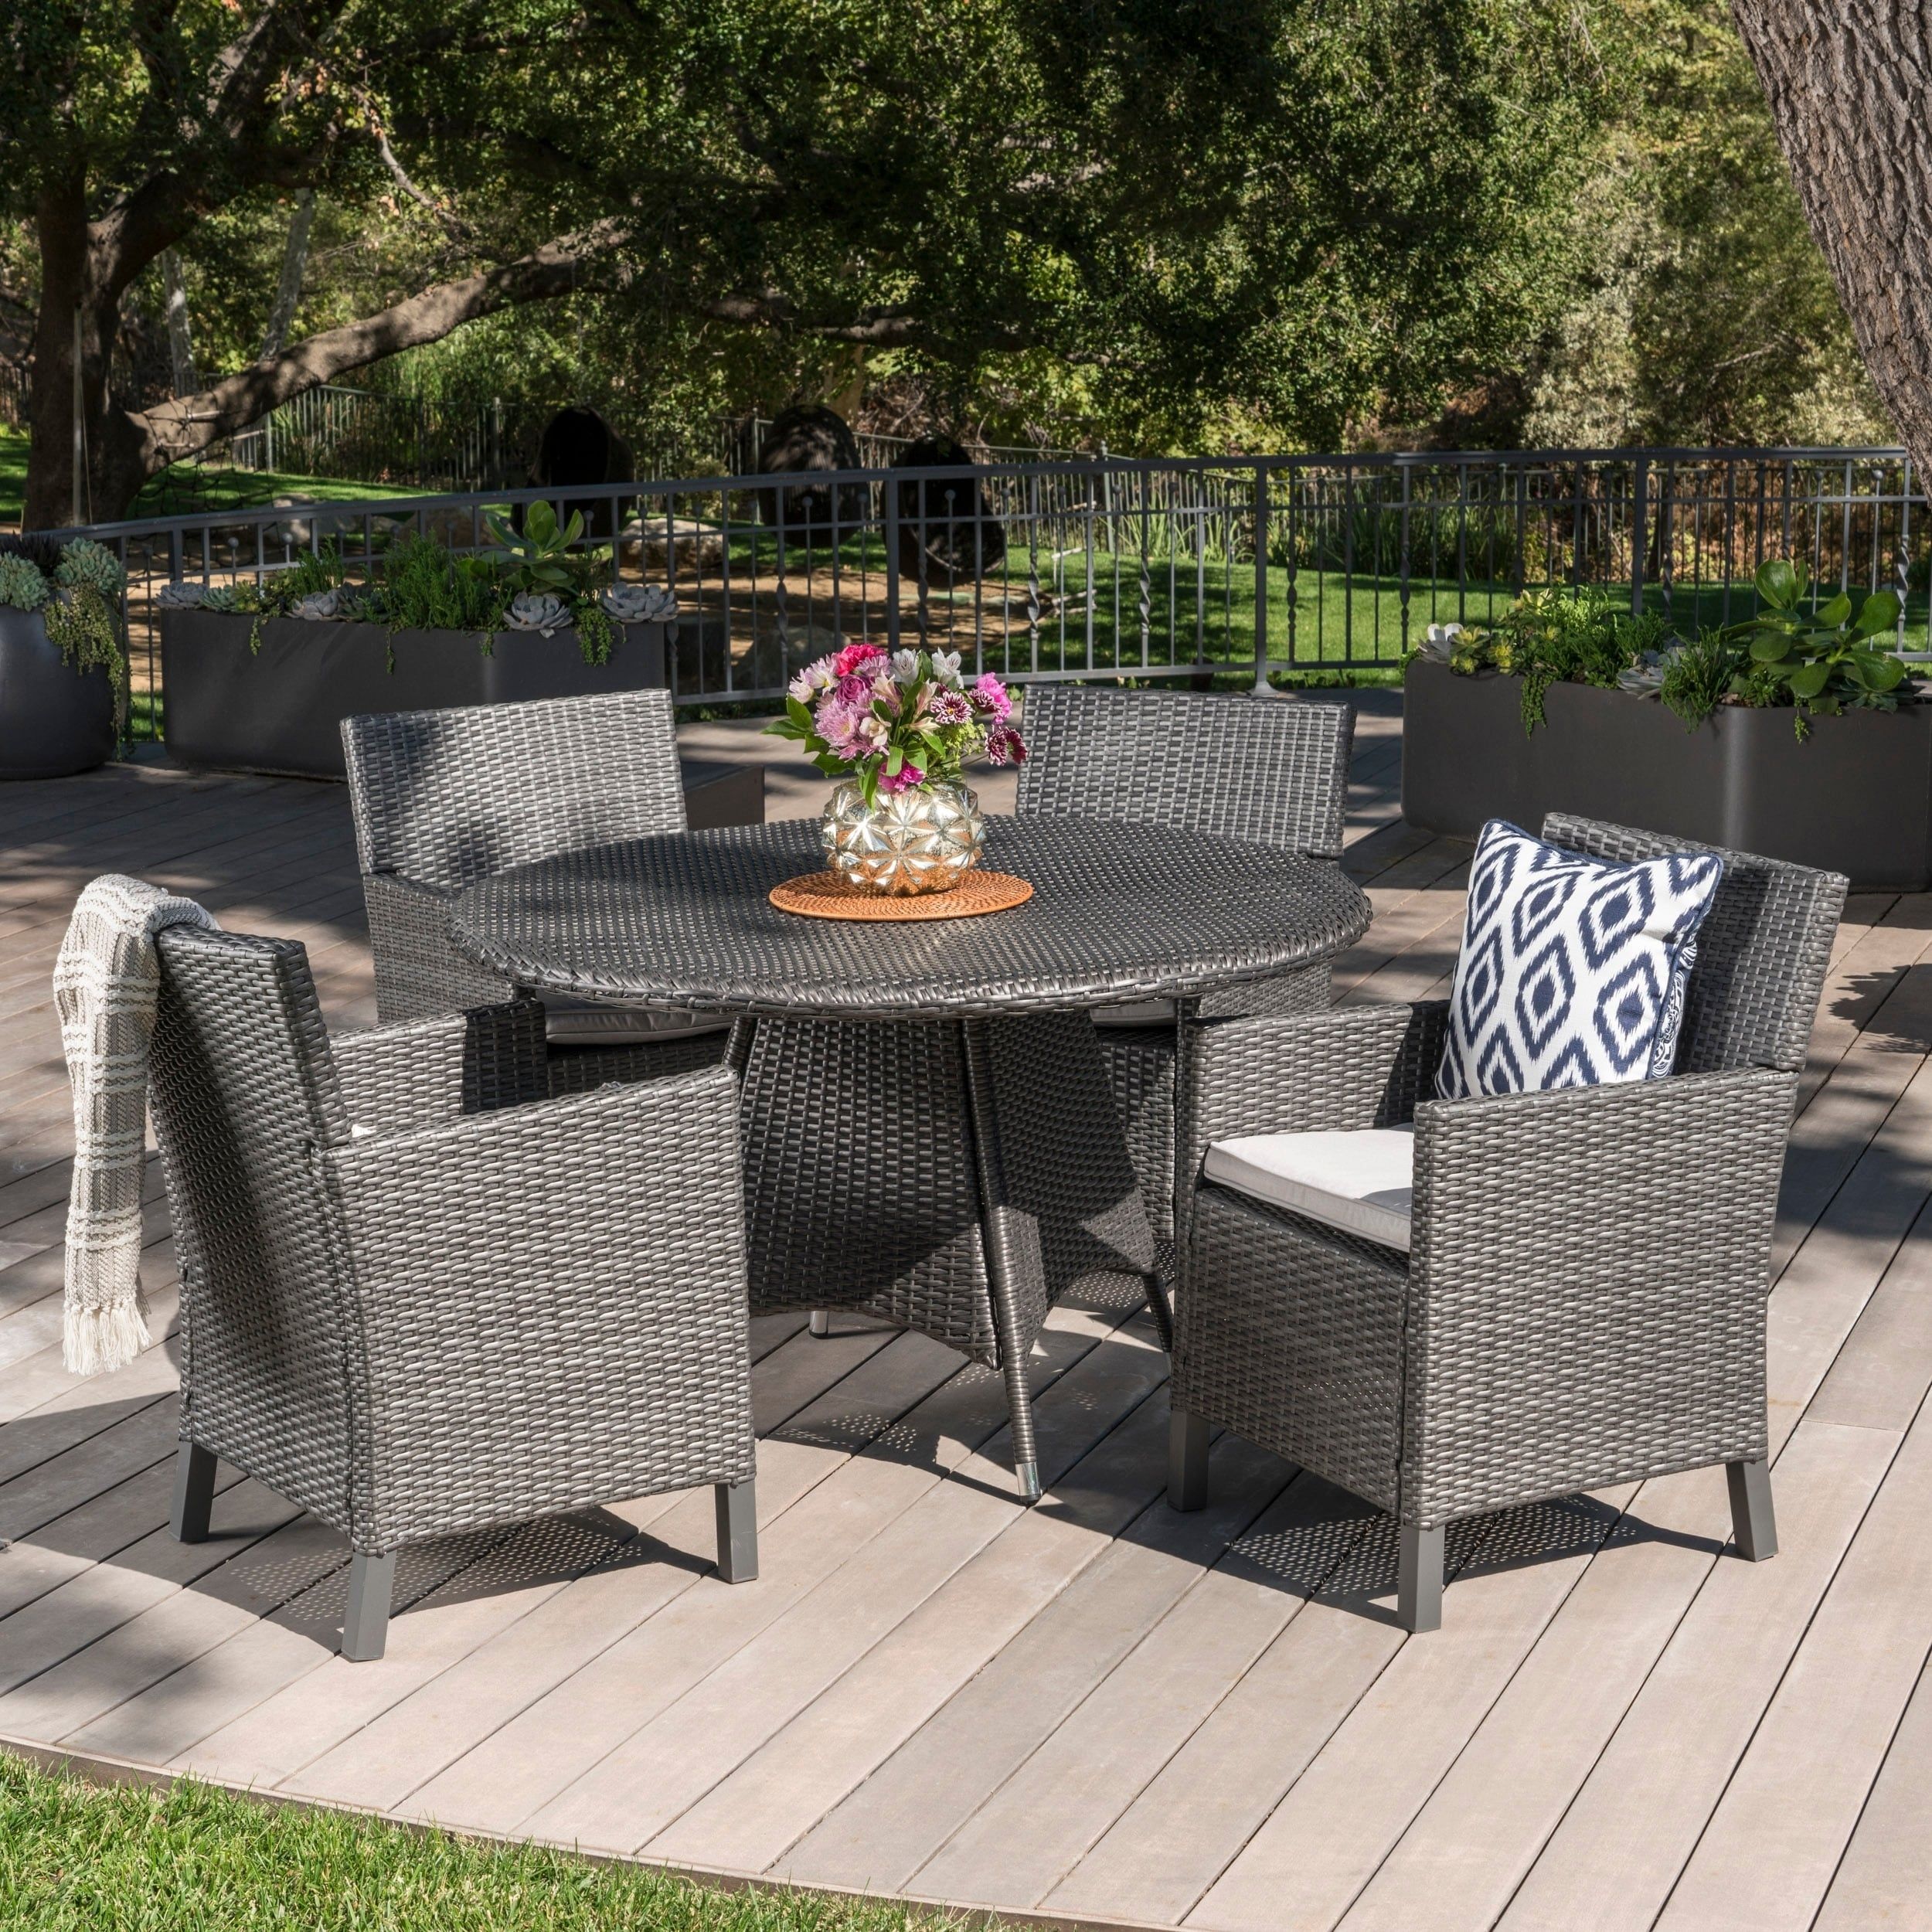 Cypress Outdoor 5 Piece Round Wicker Dining Set With | Ebay Inside Gray Wicker 5 Piece Round Patio Dining Sets (View 13 of 15)